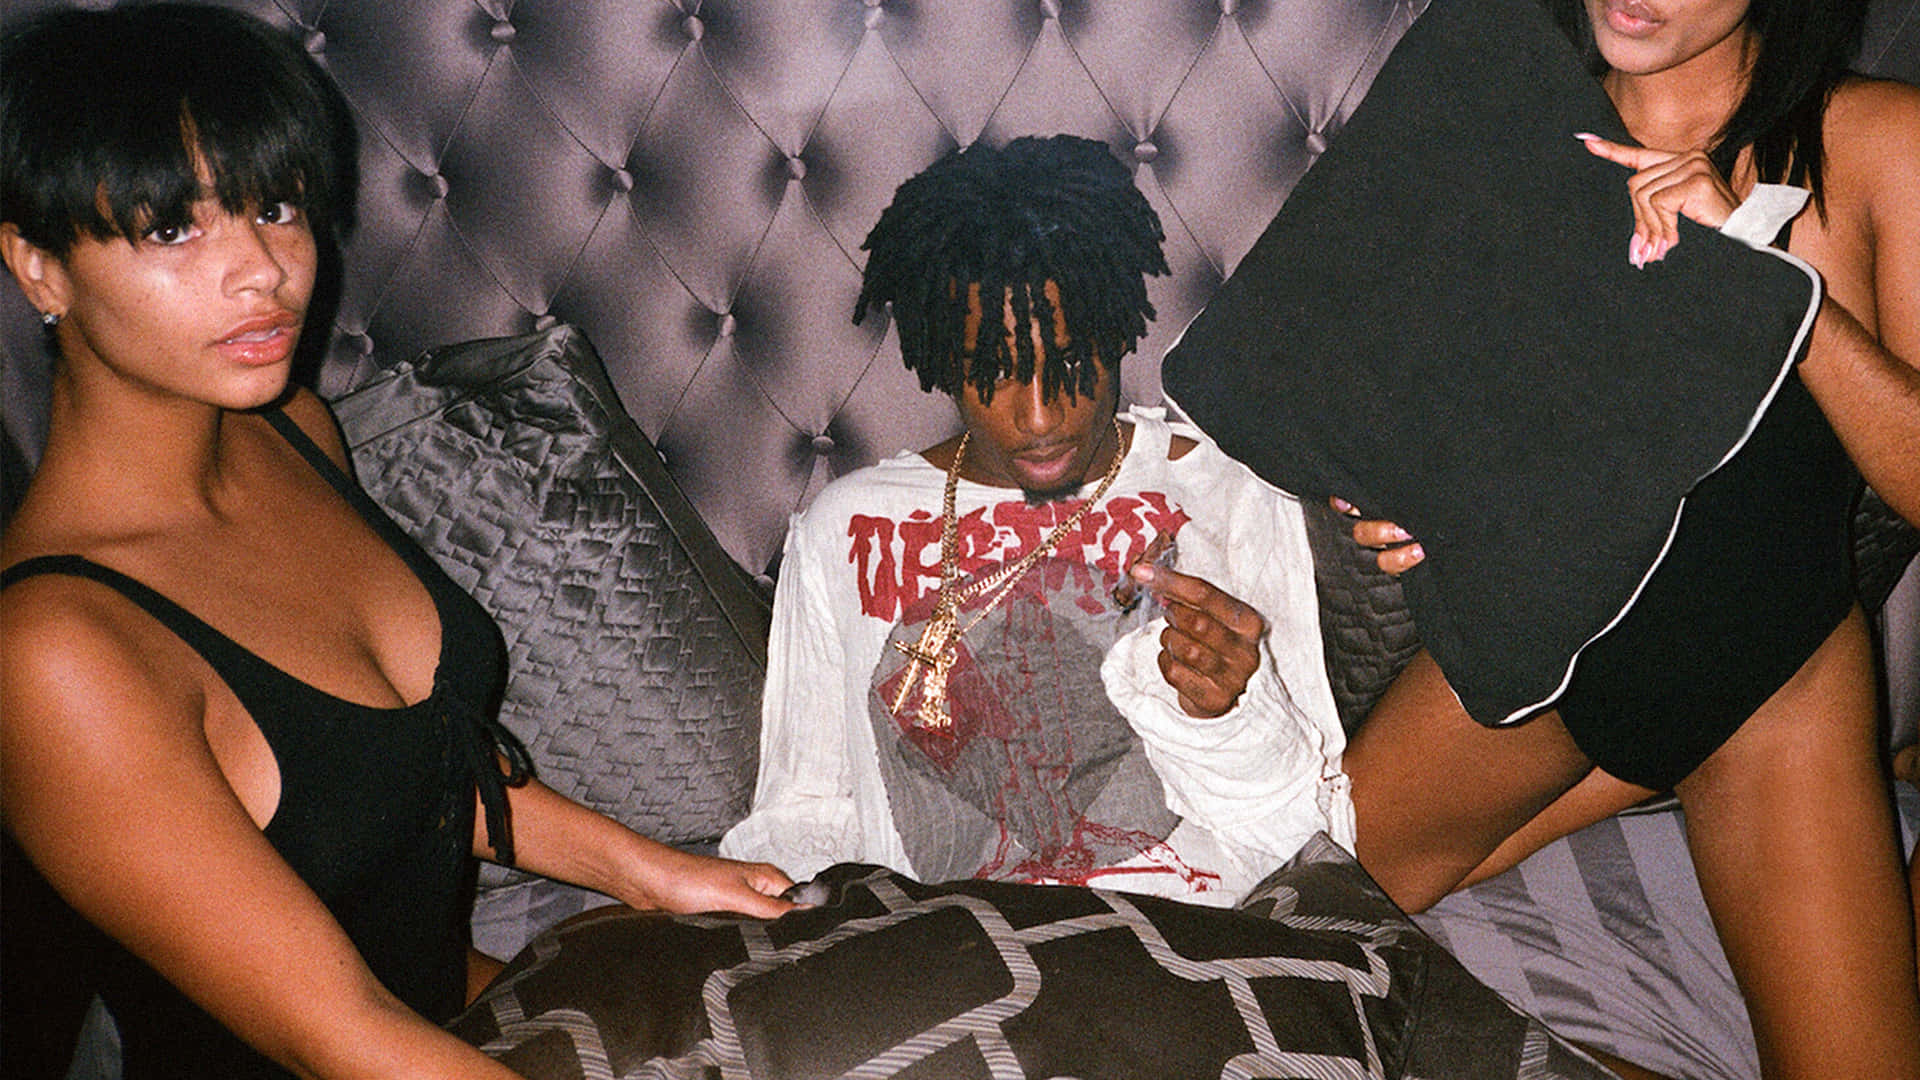 Playboi Carti, an American rapper and songwriter, dressed in a signature red and black plaid flannel shirt. Wallpaper